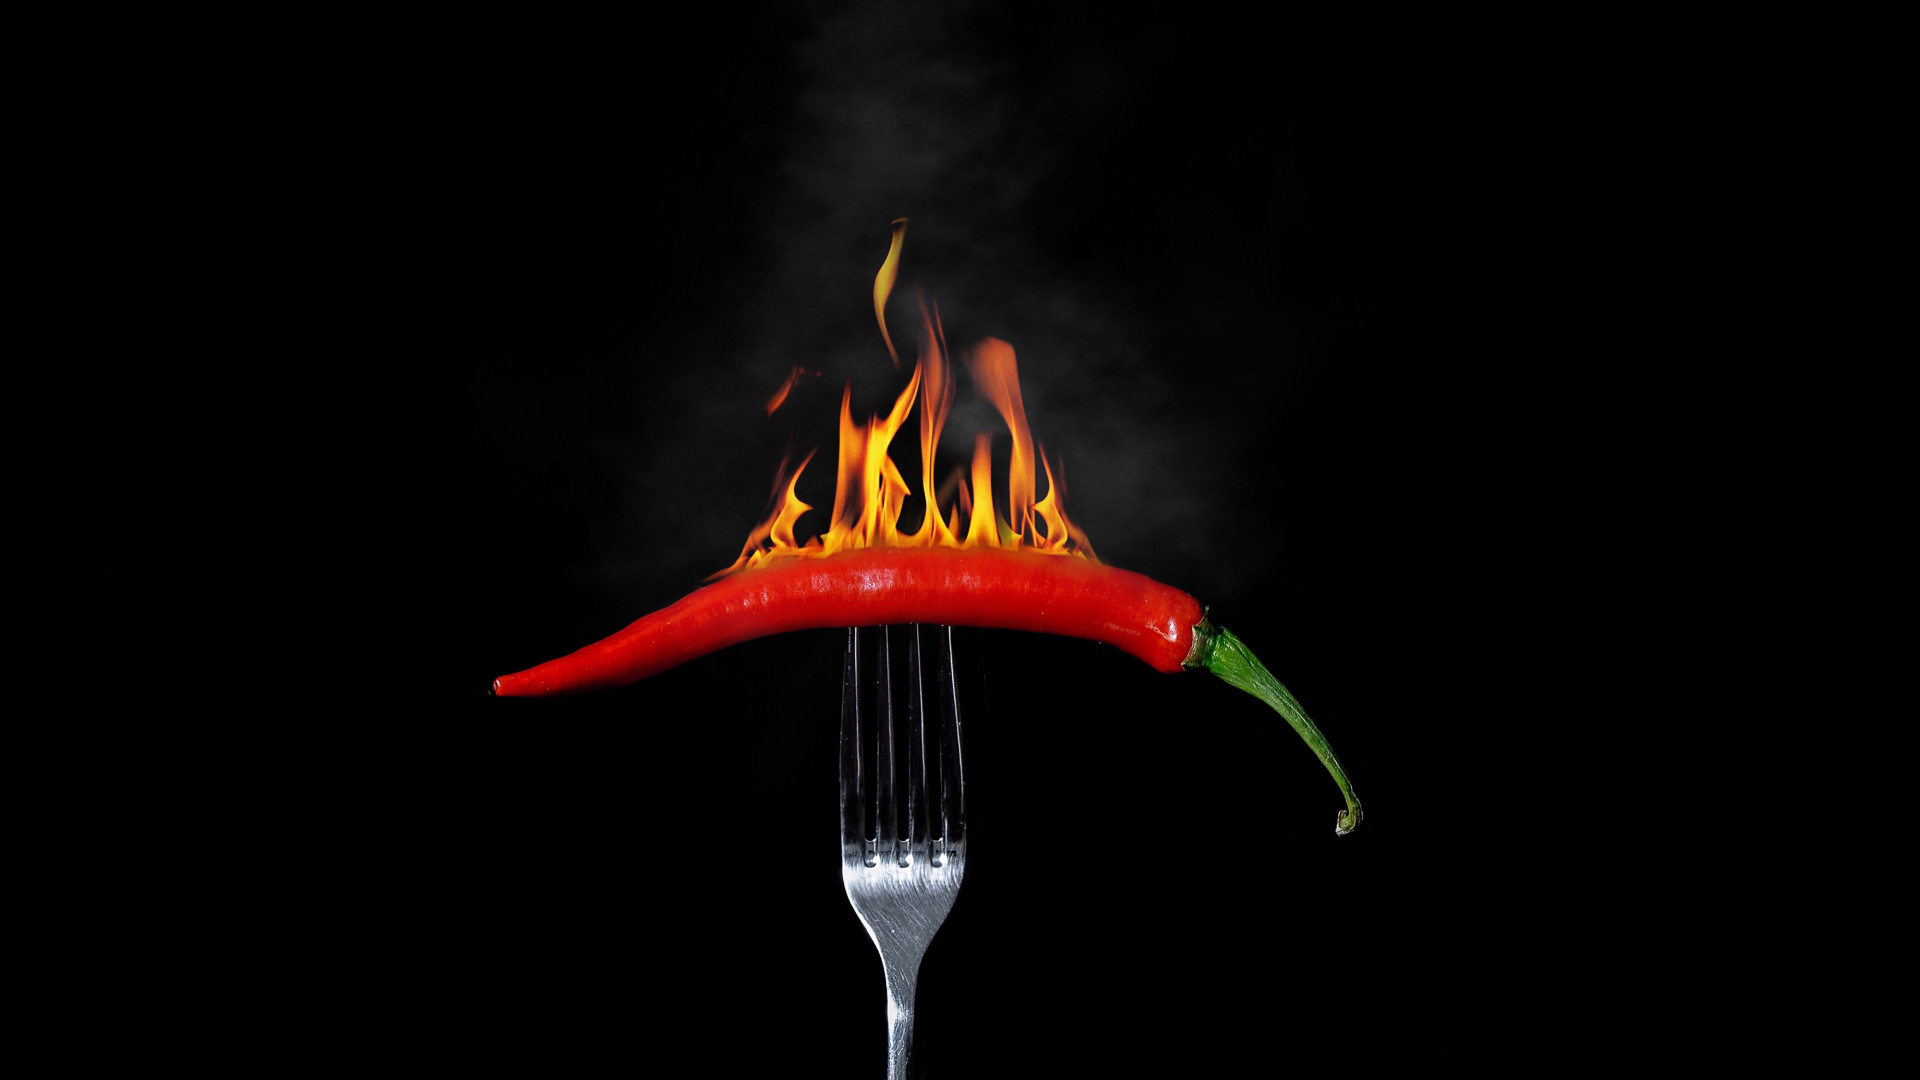 Stainless Steel Fork With Red Chili. Wallpaper in 1920x1080 Resolution